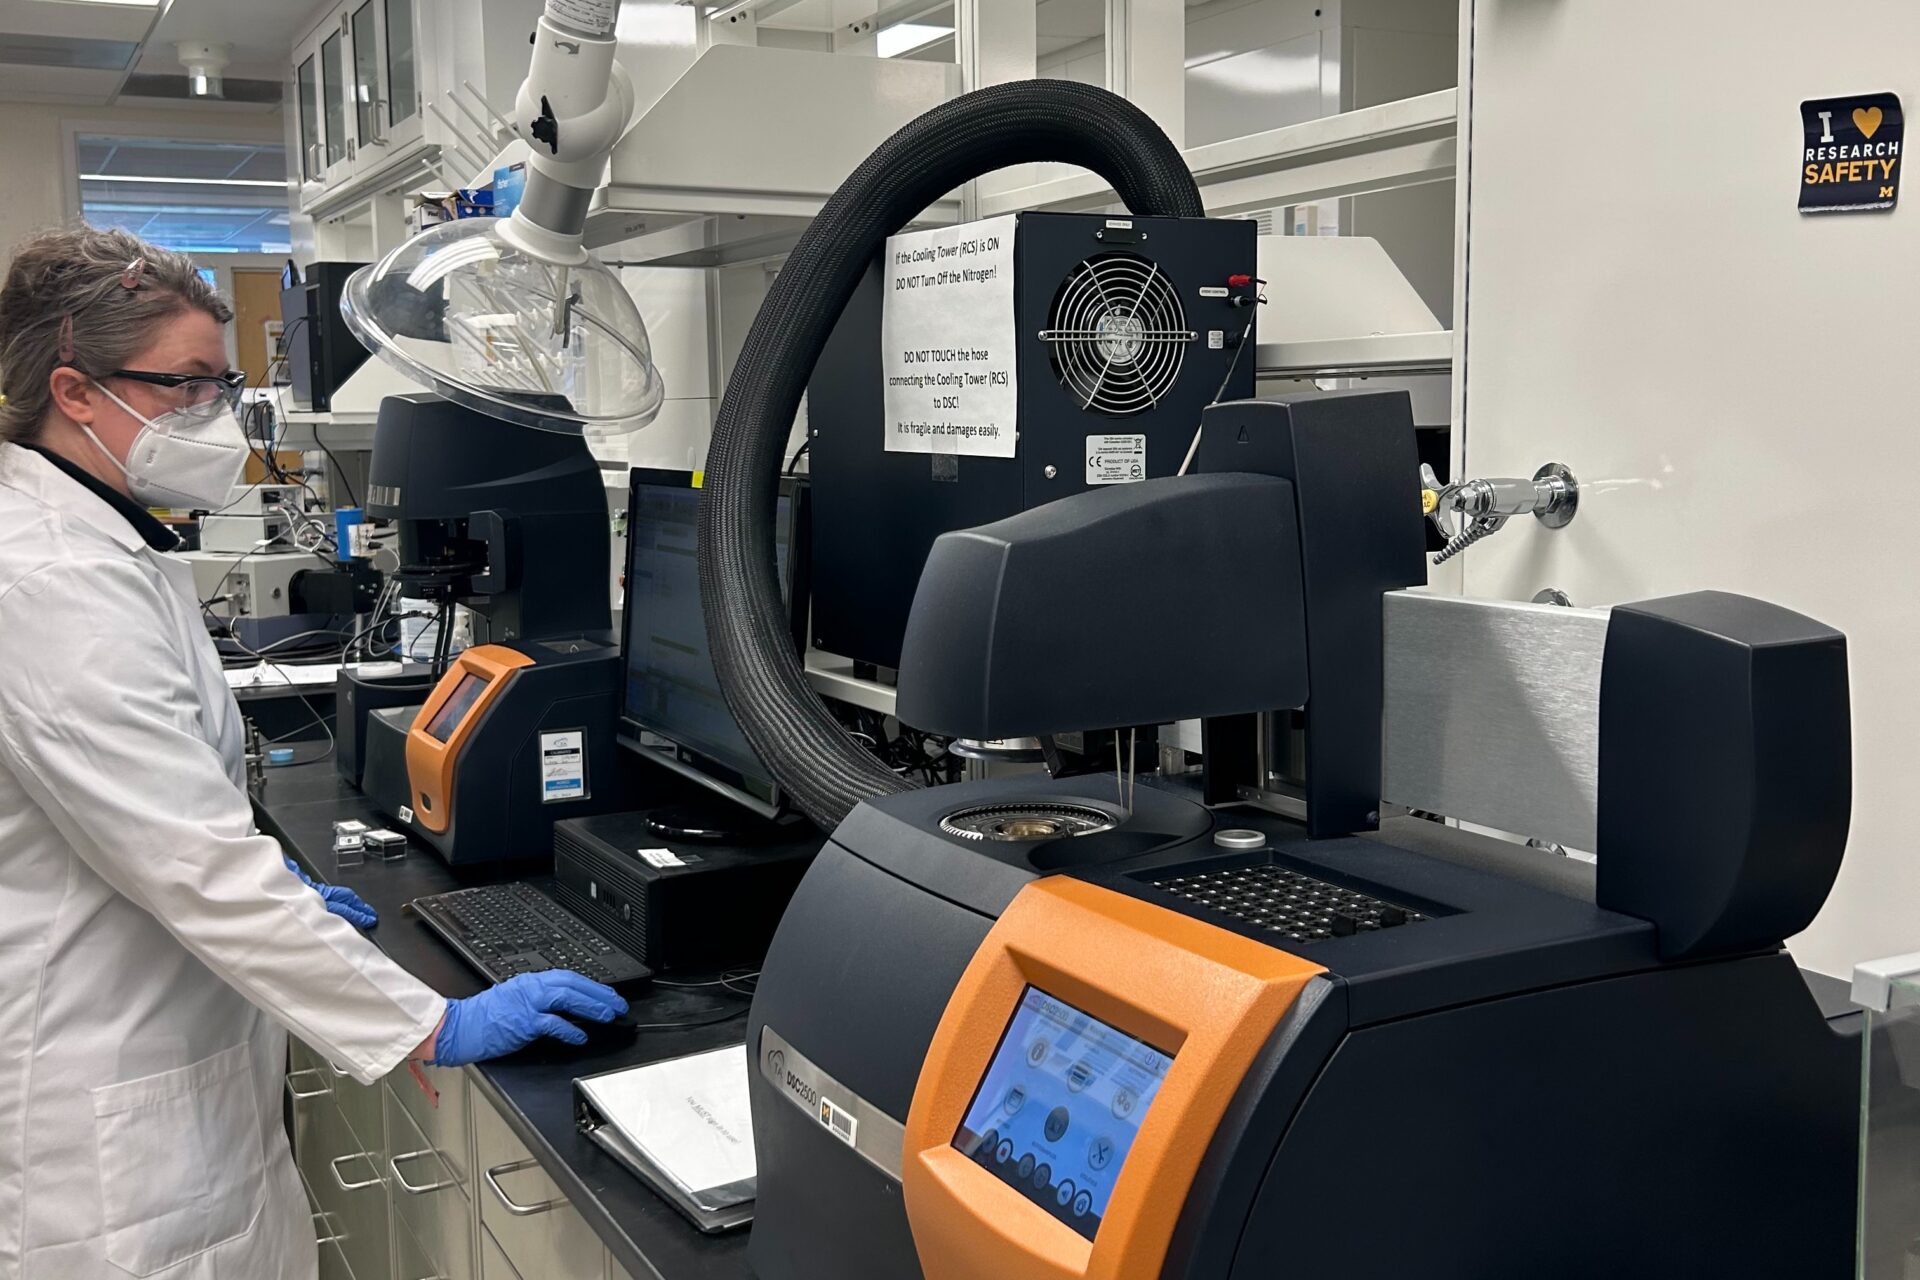 Dr. Sarah Spanninga in the Nanotechnicum using the Discovery 2500 Differential Scanning Calorimeter (DSC)